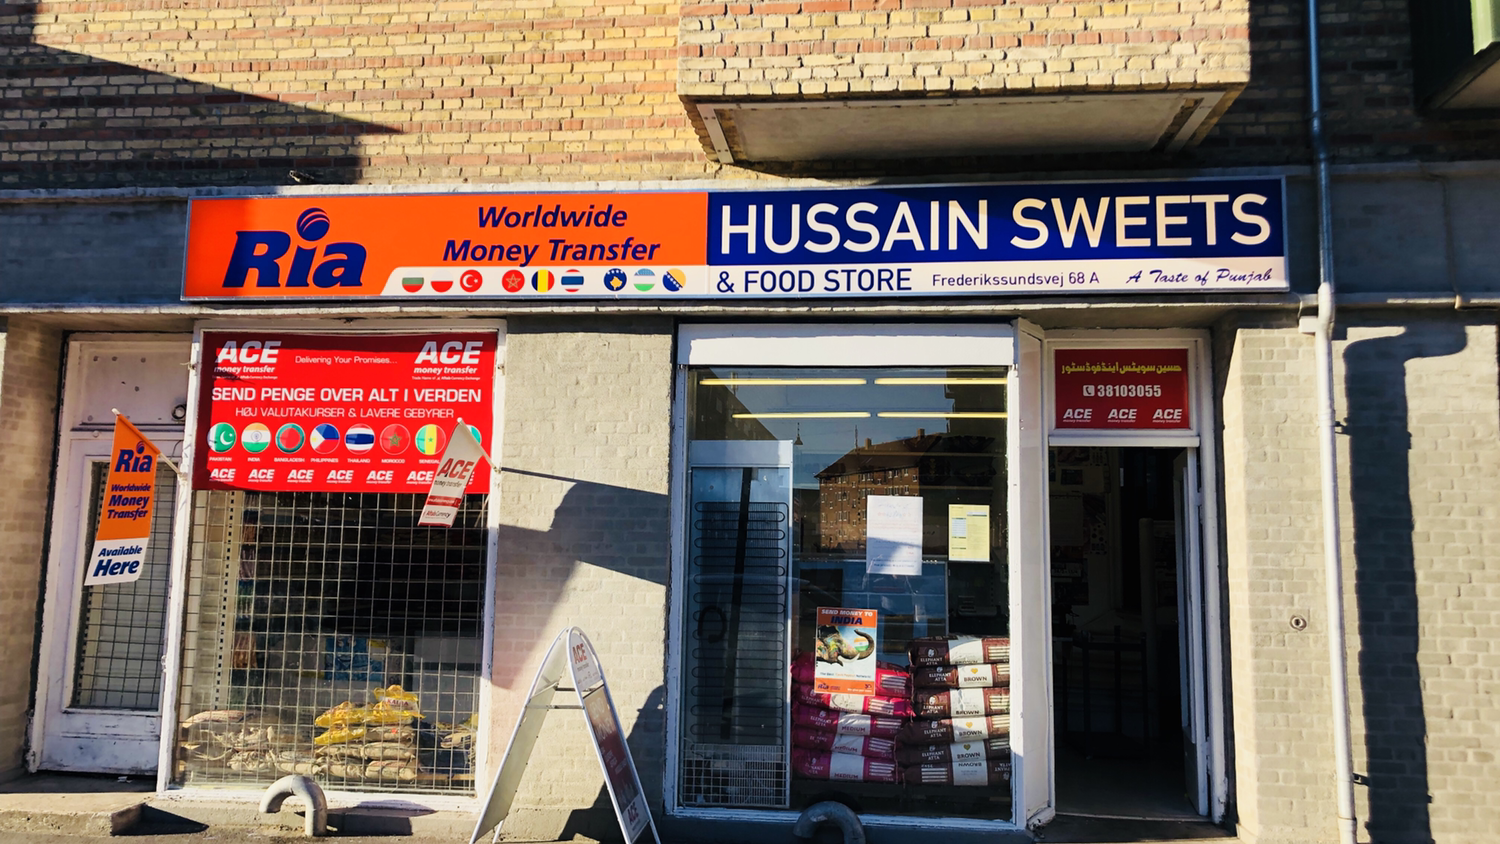 Hussain Sweets & Food store